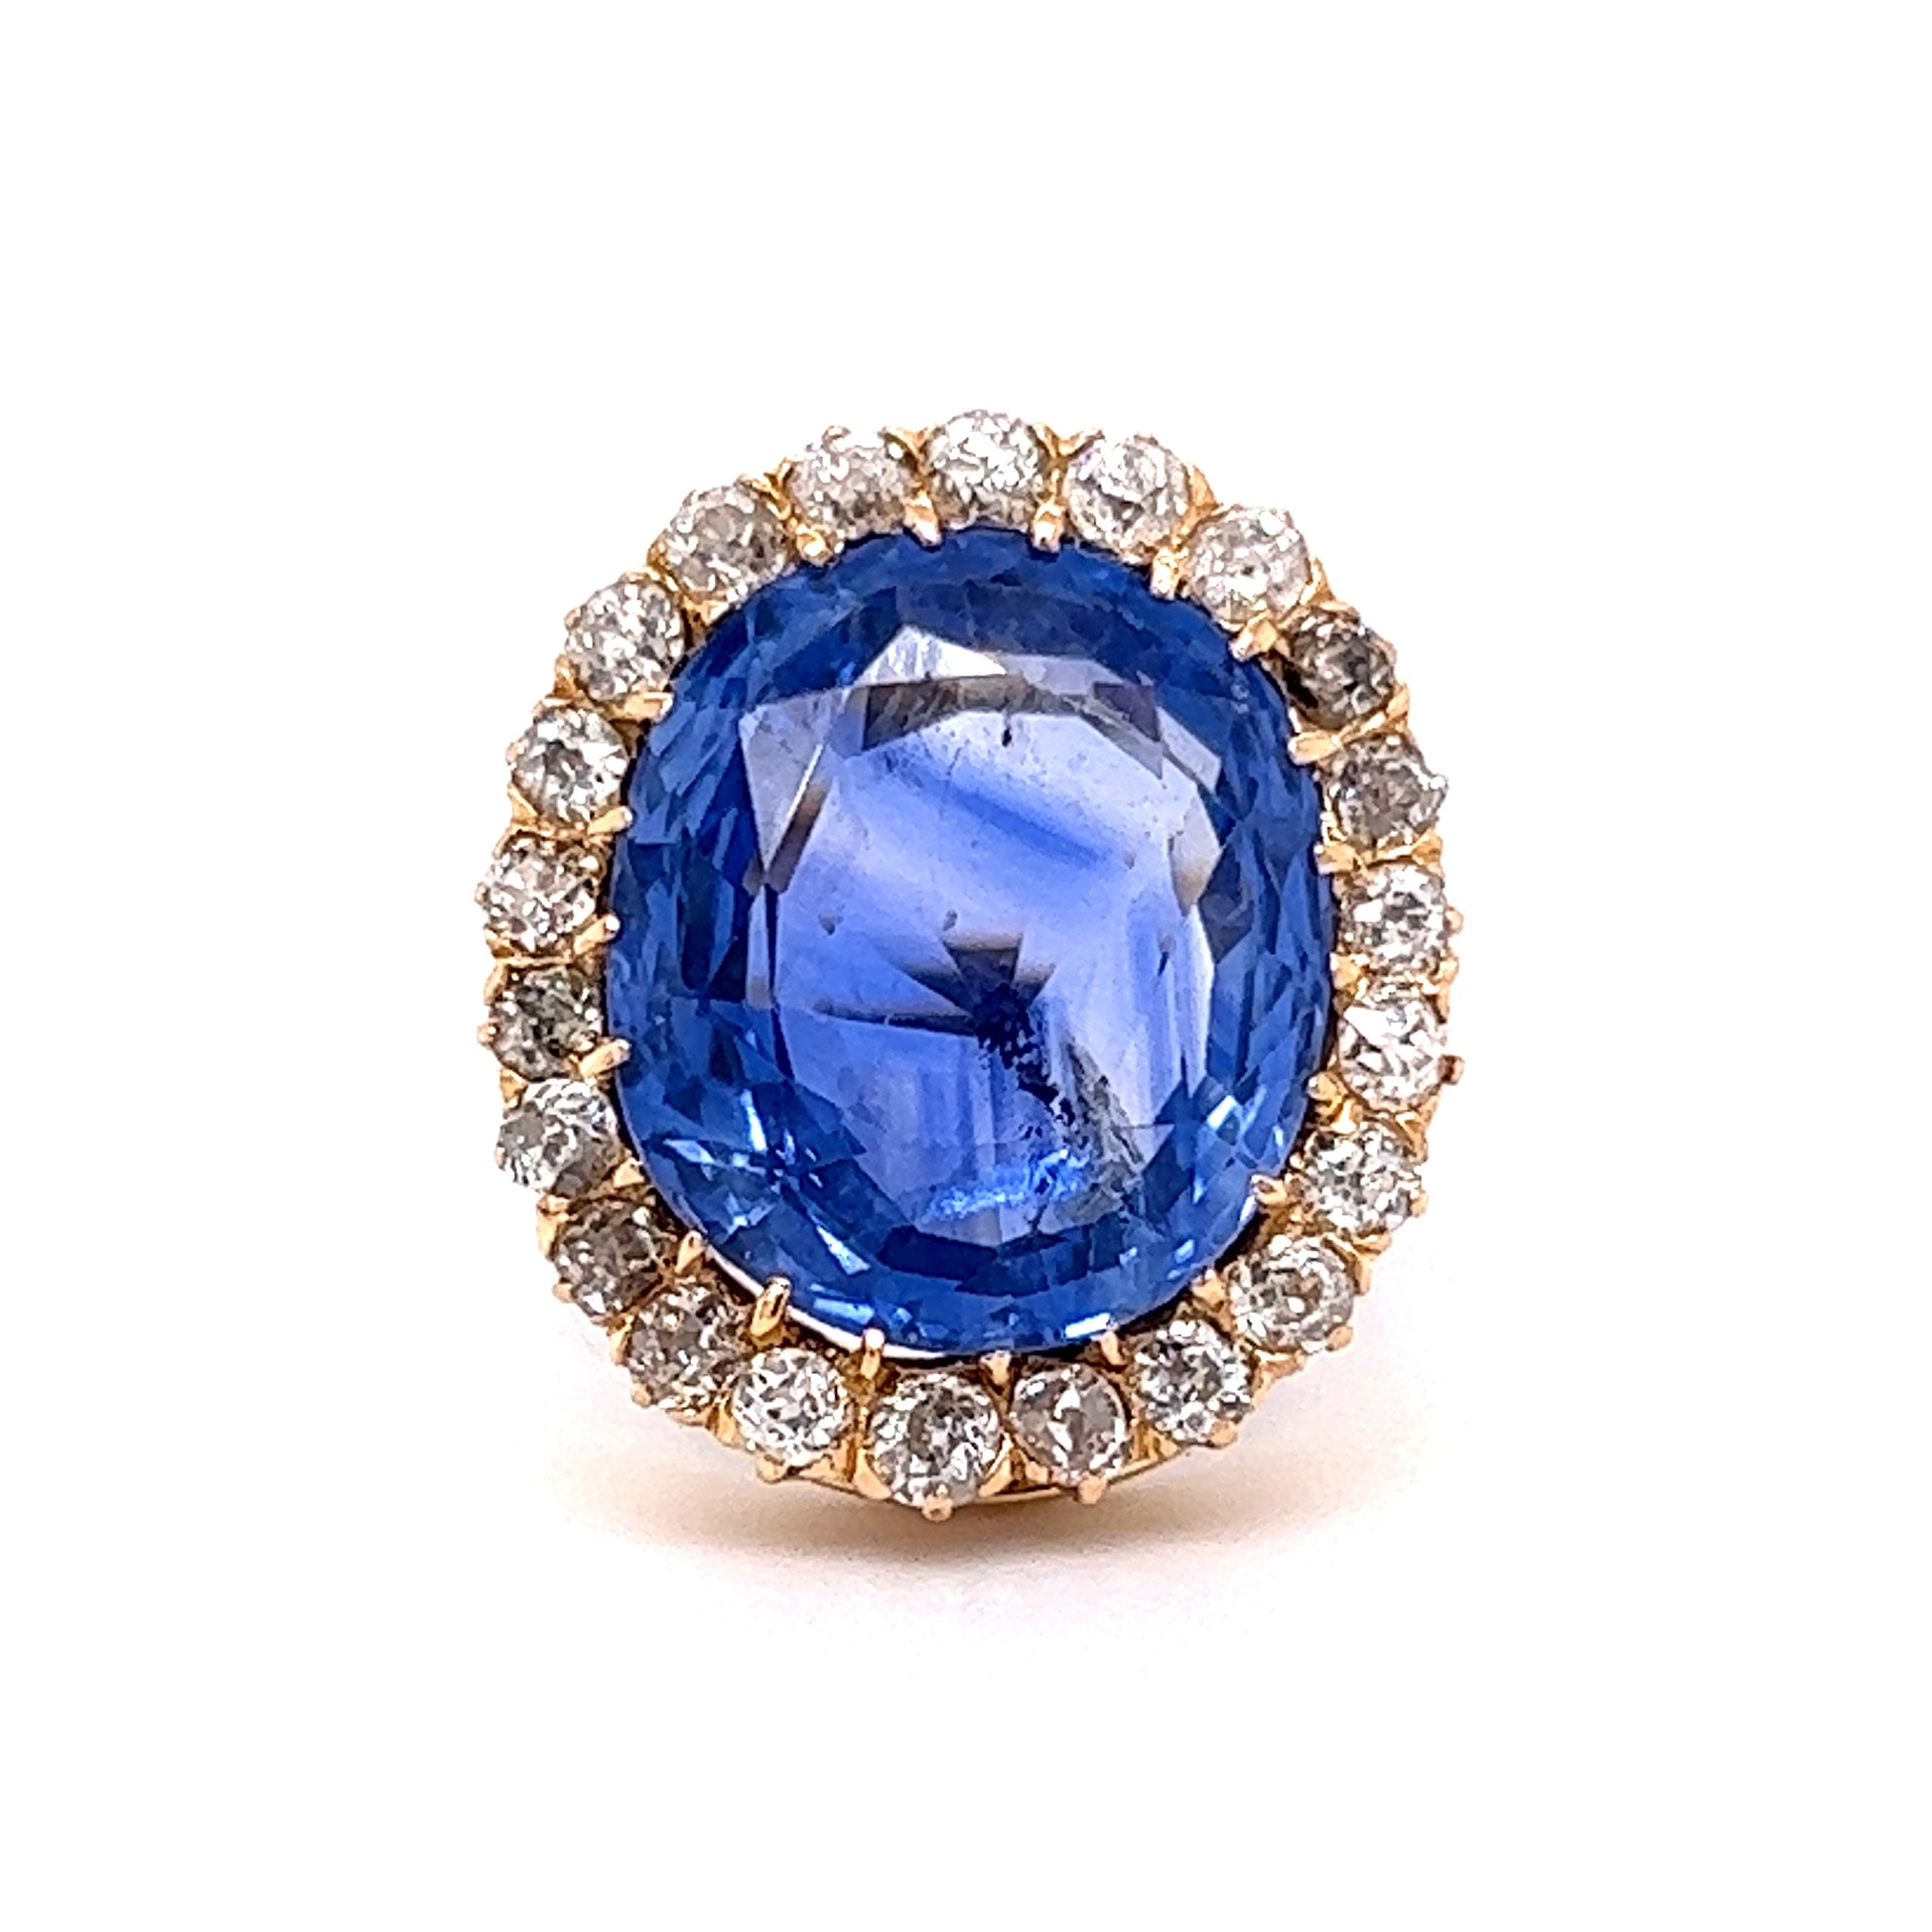 Victorian Ceylon Sapphire & Diamond Cocktail Ring in 18kComposition: 18 Karat Yellow Gold Ring Size: 6.25 Total Diamond Weight: 1.32ct Total Gram Weight: 7.6 g